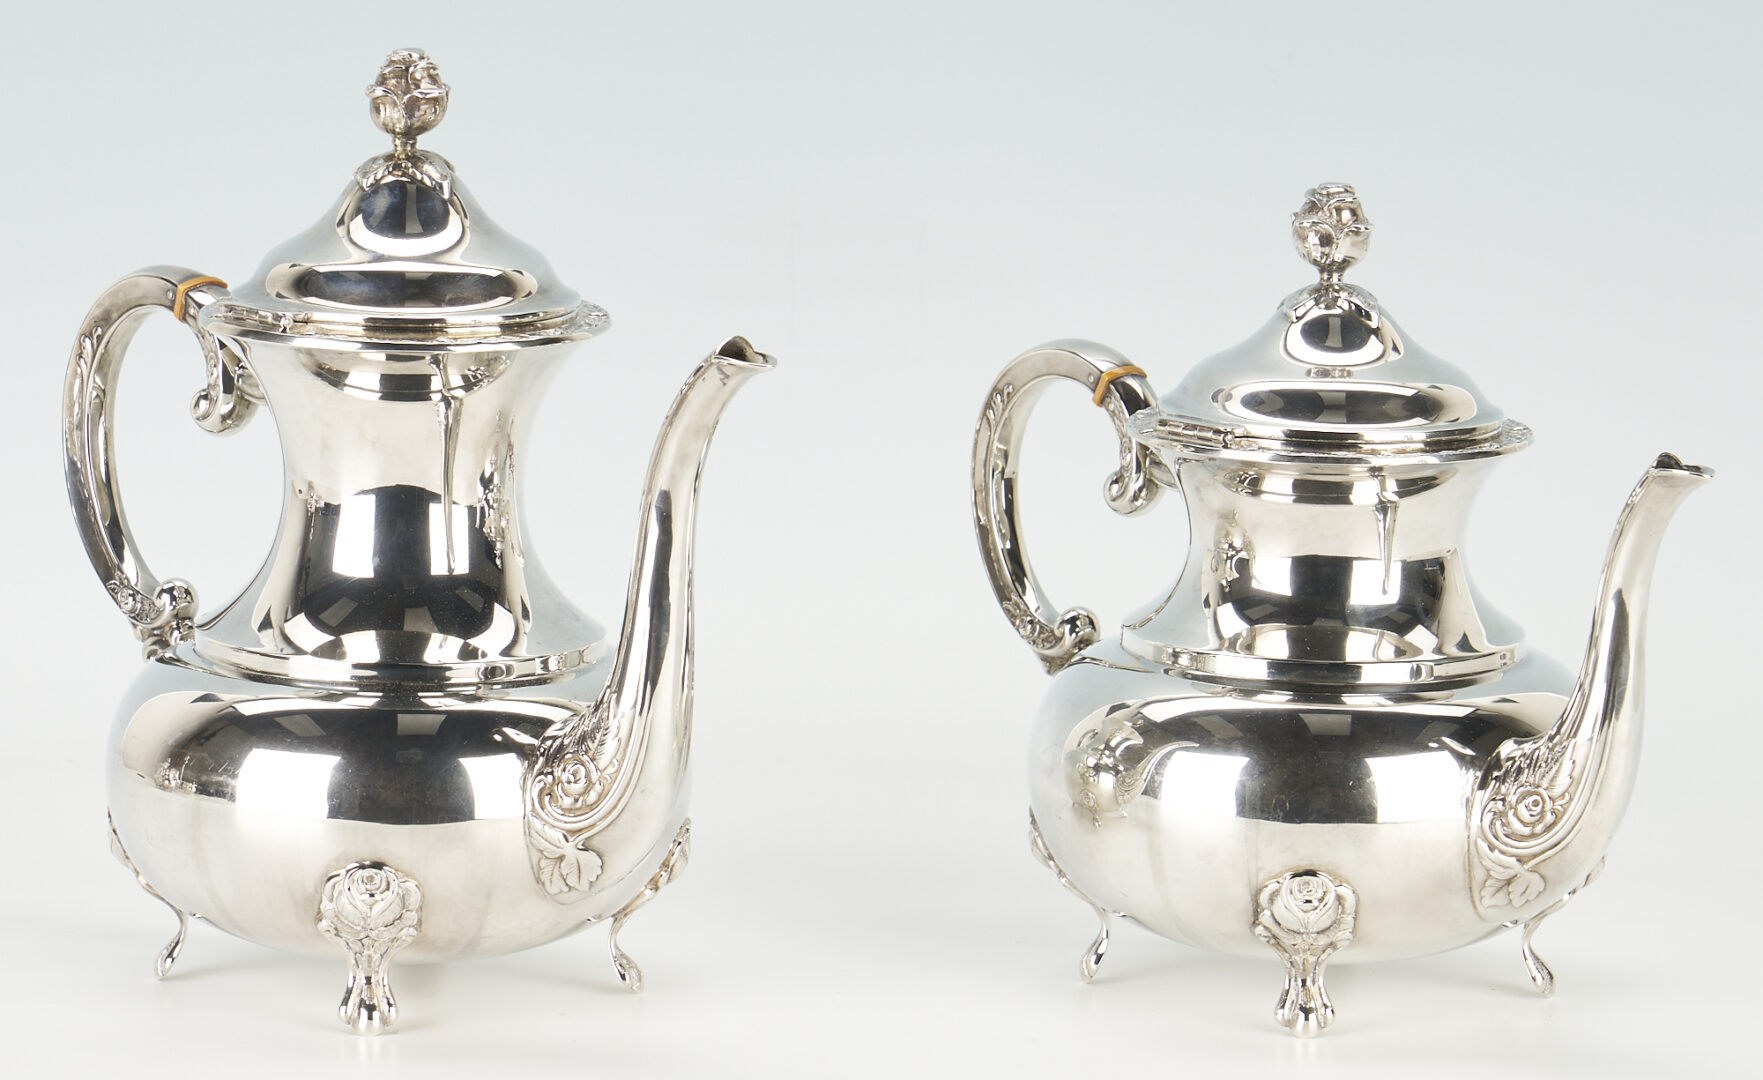 Lot 39: Eugen Ferner 5 pc Sterling Tea Set with Silverplated Tray